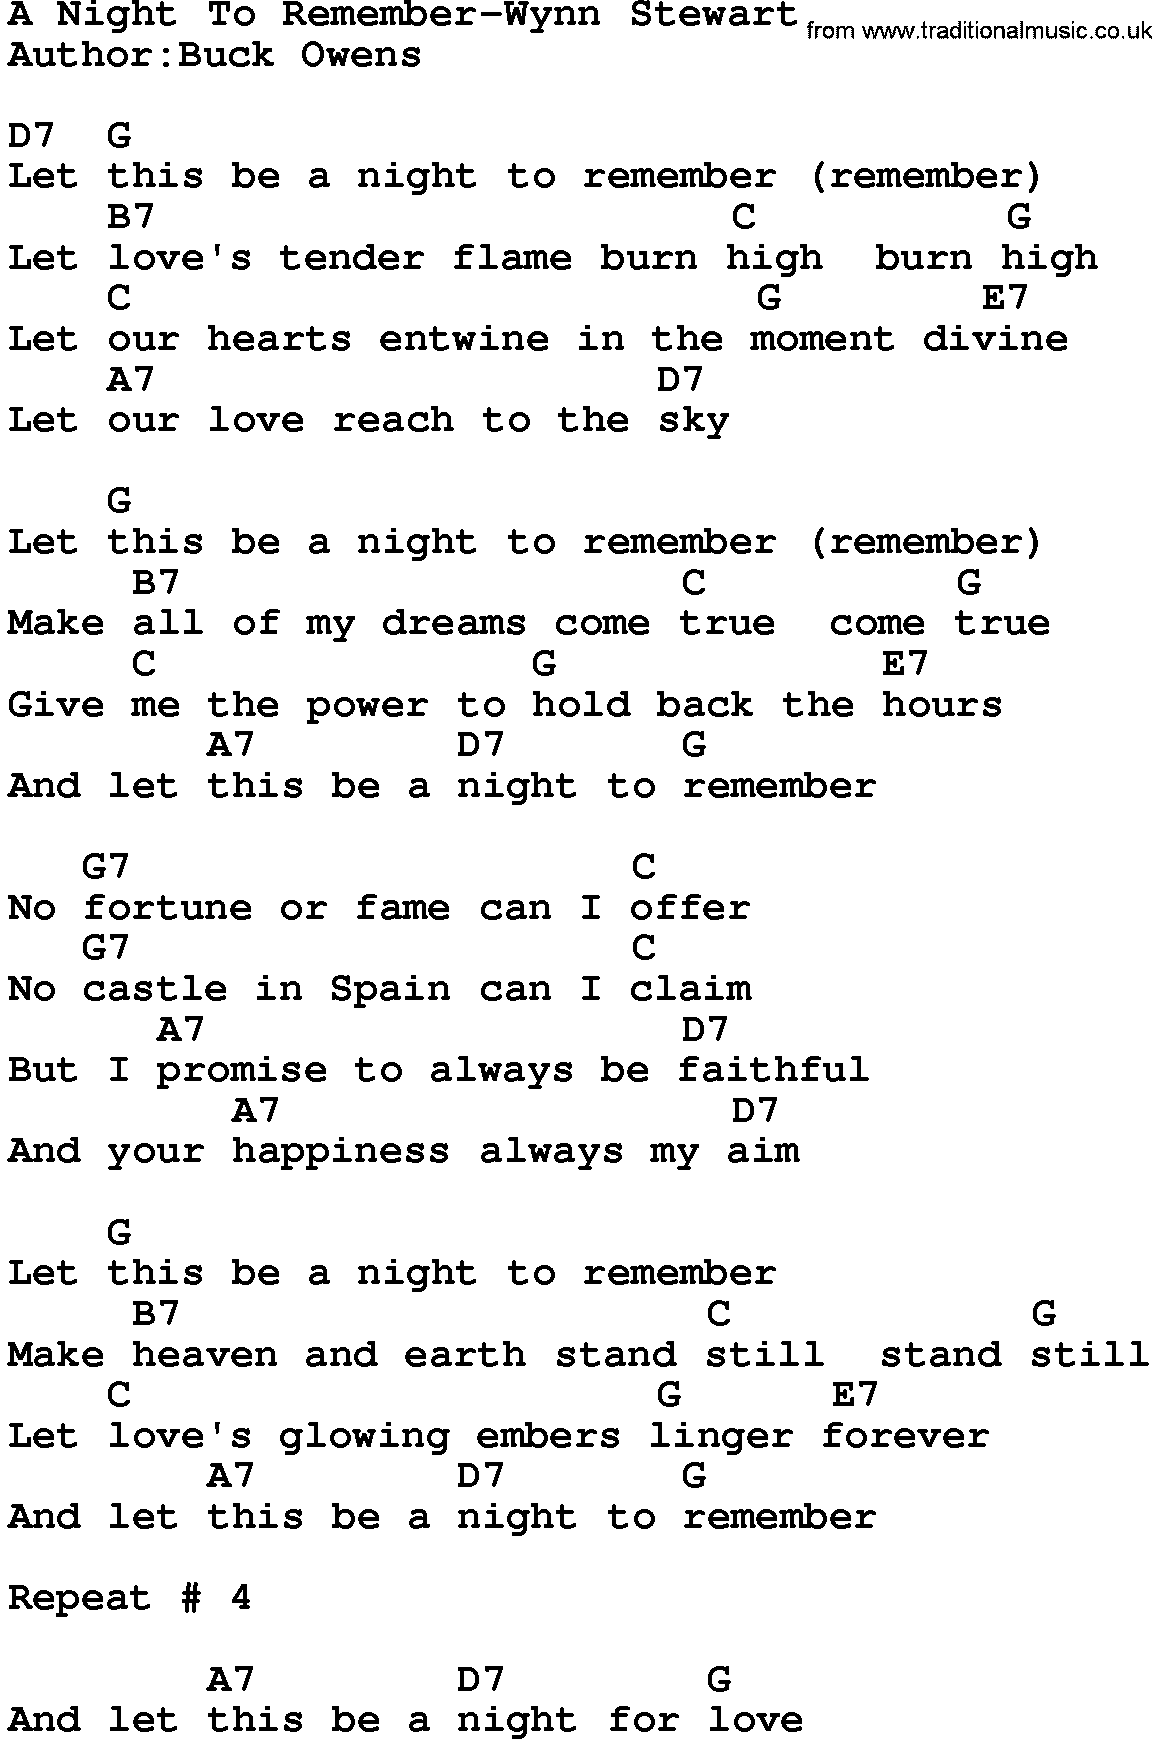 Country music song: A Night To Remember-Wynn Stewart lyrics and chords